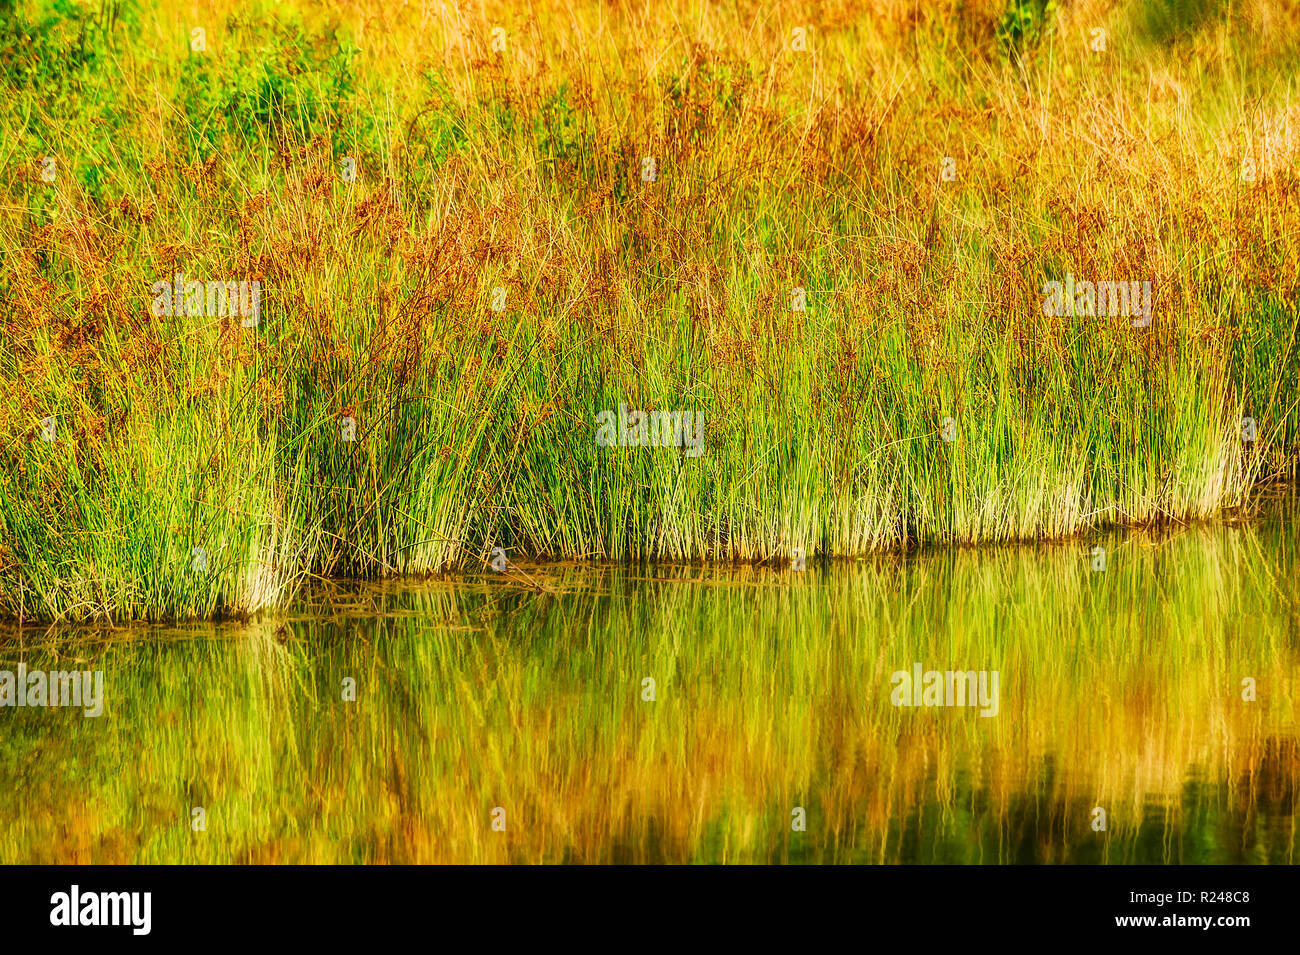 Nature background image of reed like closely bunched and lining the water's edge of a lake, their warm colors reflecting the in calm waters. Stock Photo